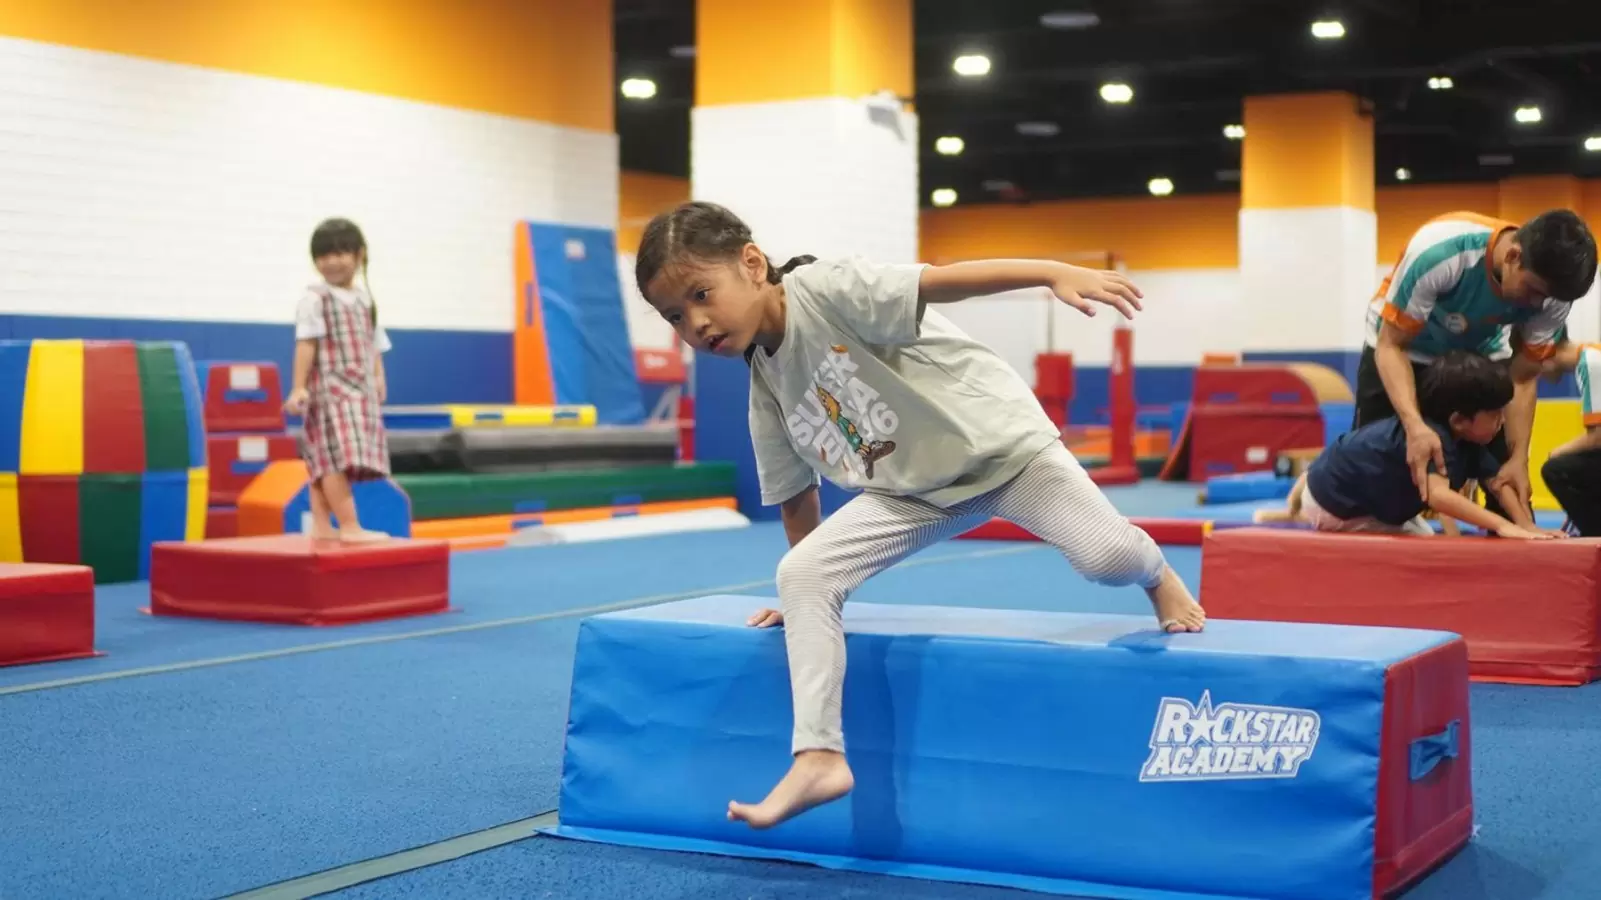  Tips on How To Do Gymnastics While Fasting